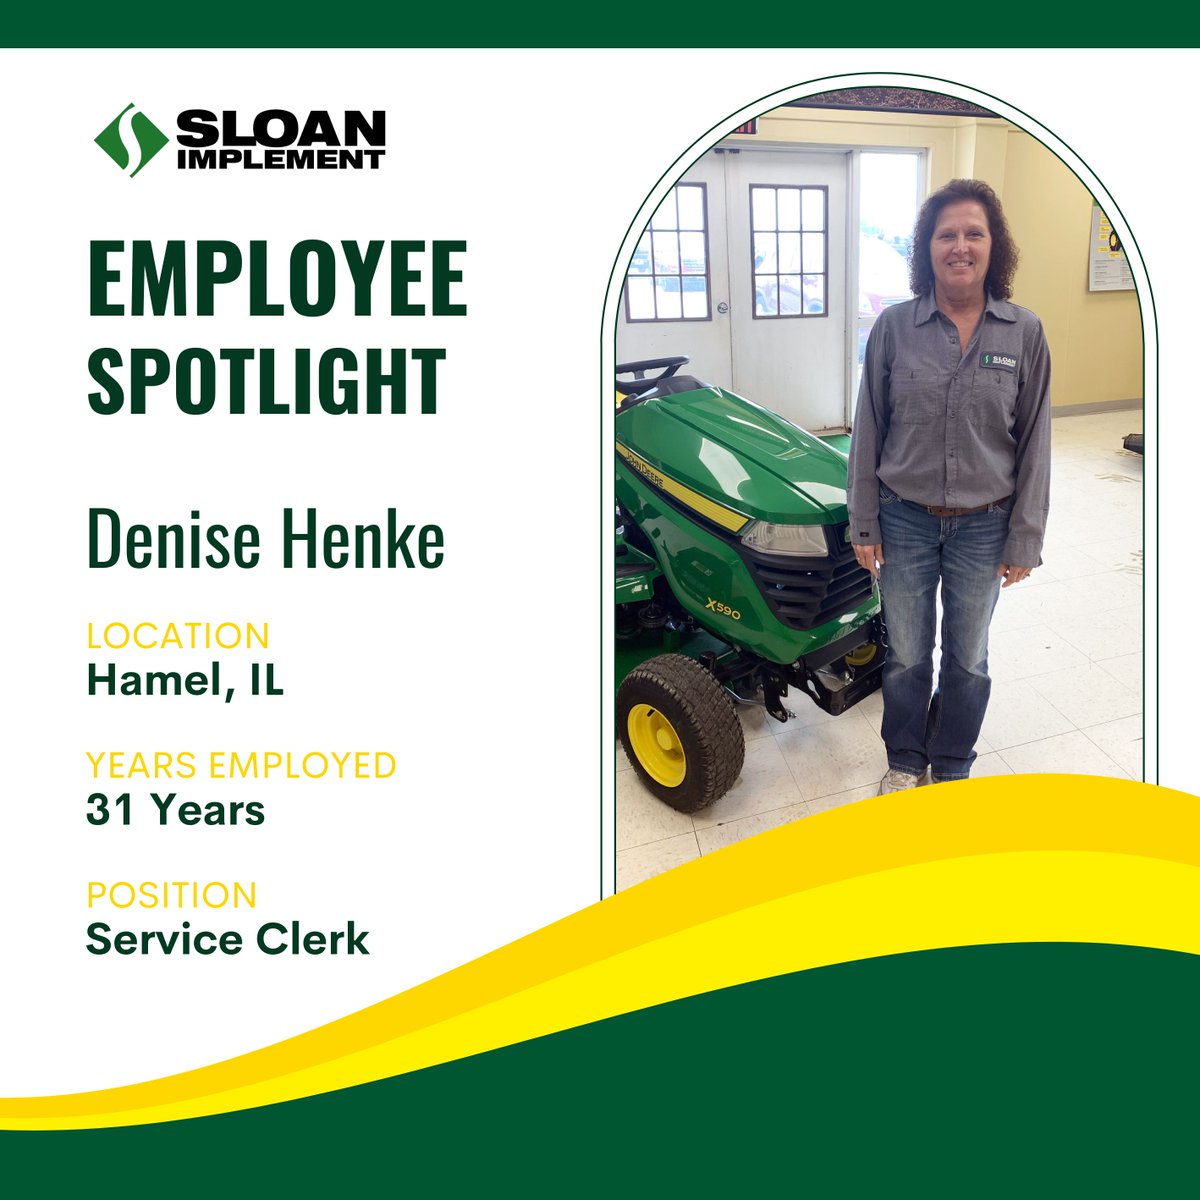 Employee Spotlight! 🌟👏 - Denise has been with John Deere for 31 years and Sloan Implement for 23 years. Denise has played a large role in Hamel's success over the years and has always been dependable and someone all employees lean on. We appreciate your dedication and support!